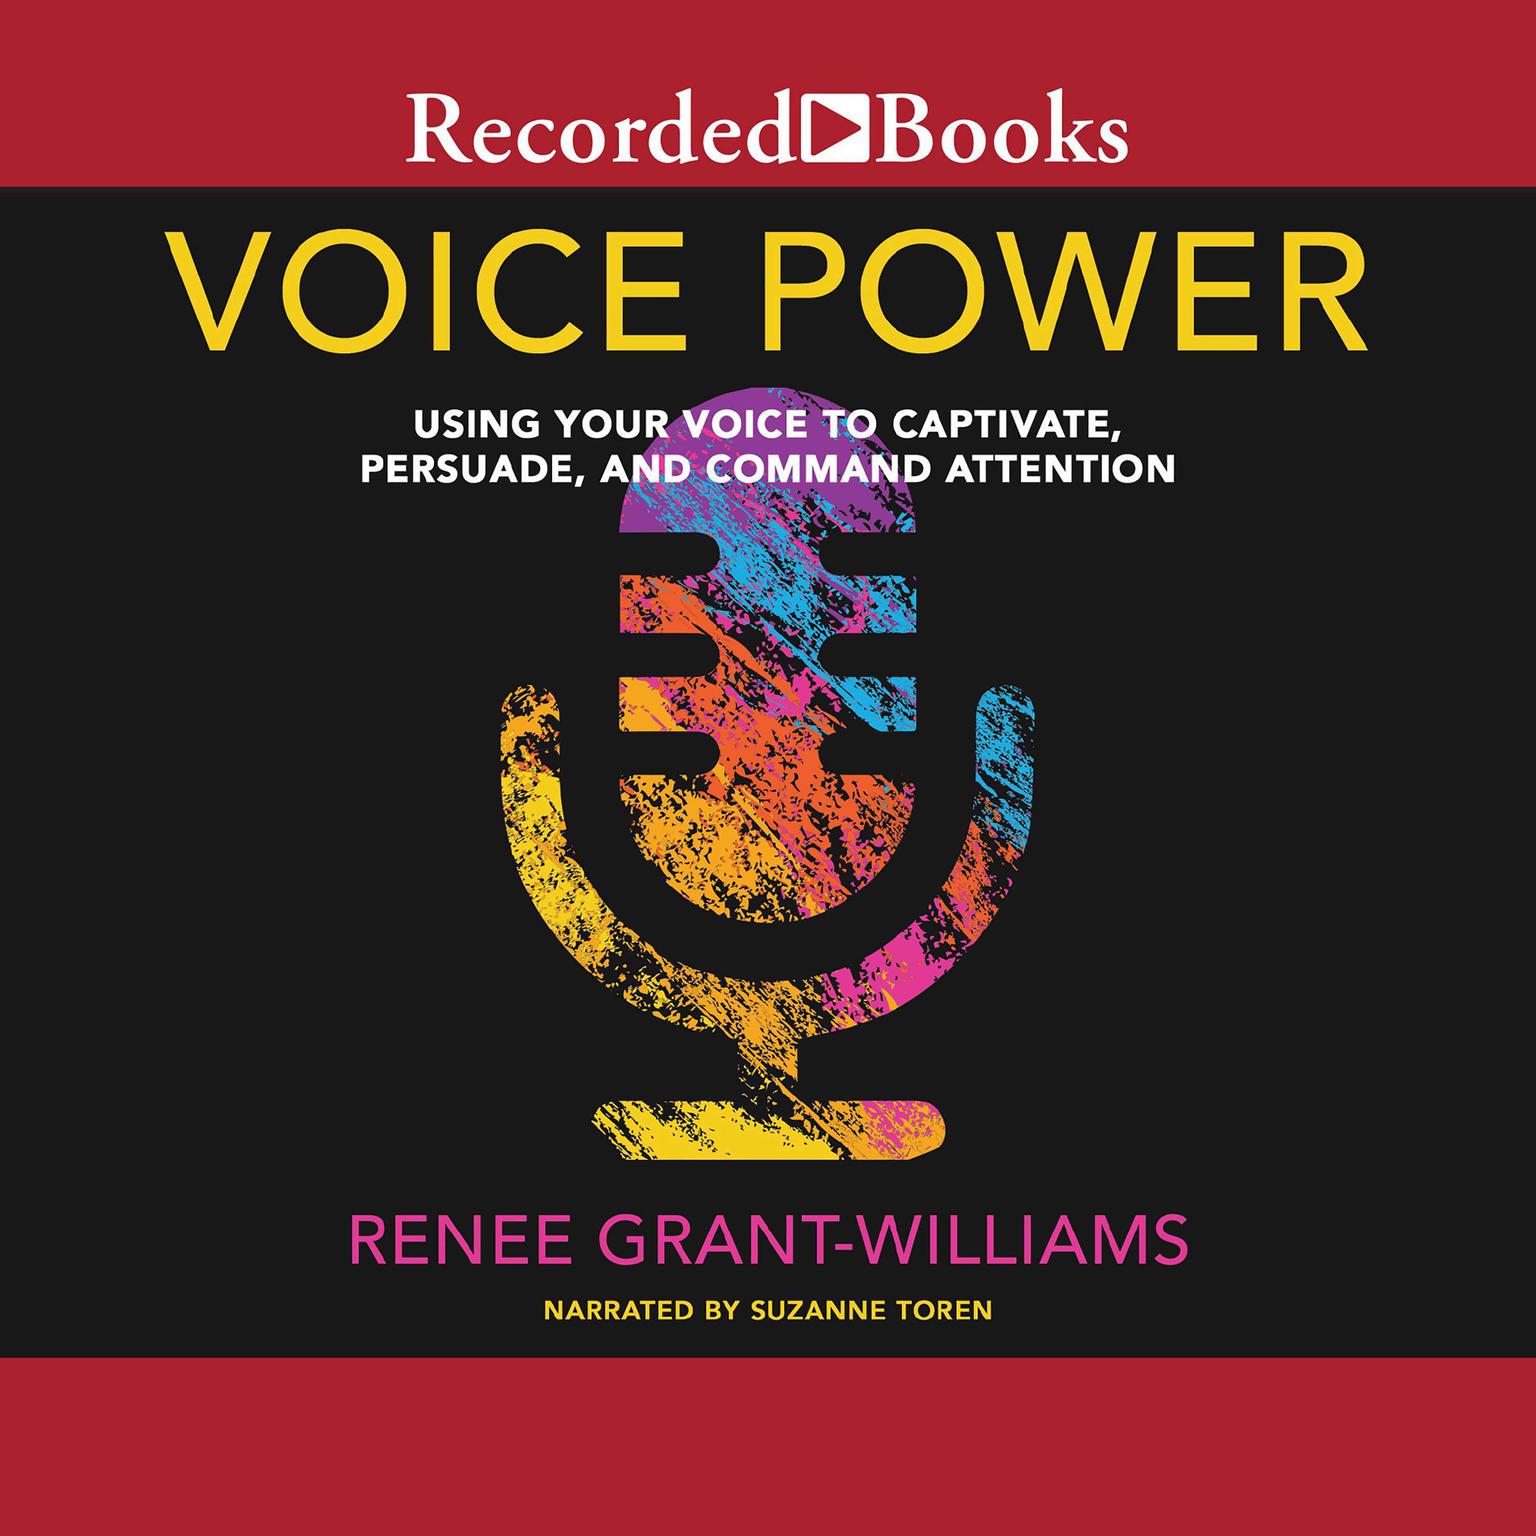 Voice Power: Using Your Voice to Captivate, Persuade, and Command Attention Audiobook, by Renee Grant-Williams